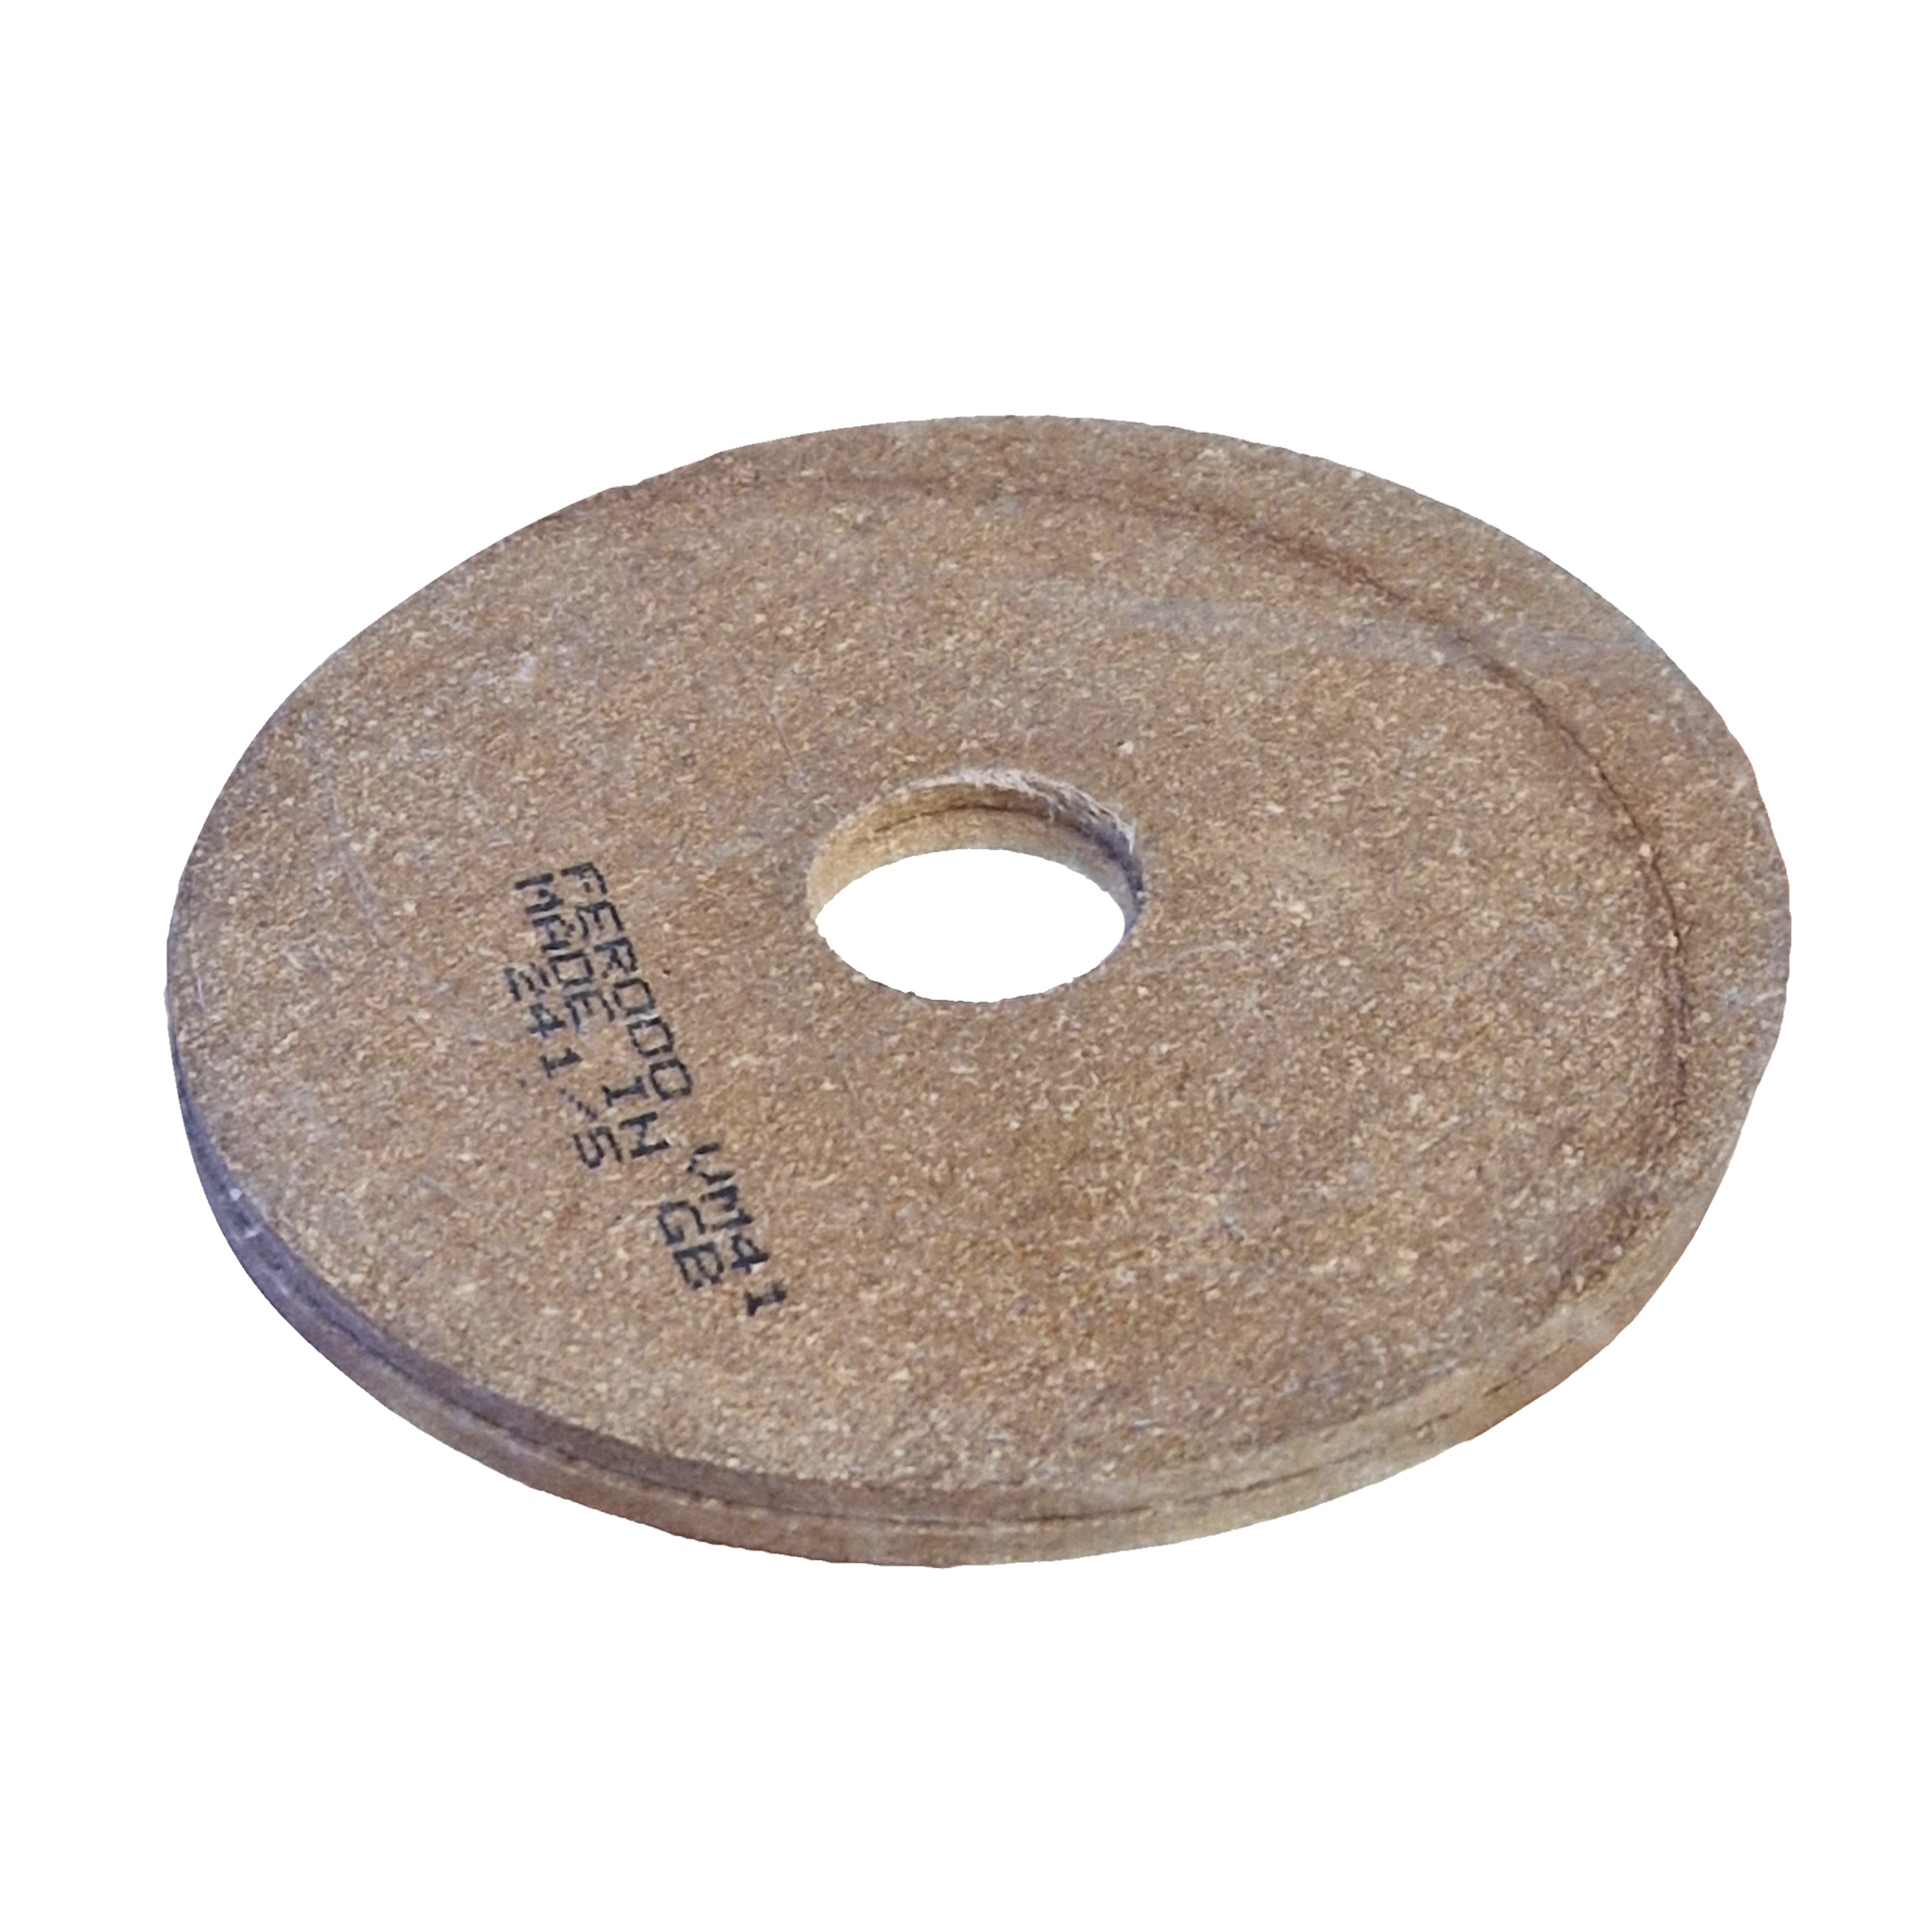 4.5" Friction Discs (Pair) for Mowbray Stabilizer